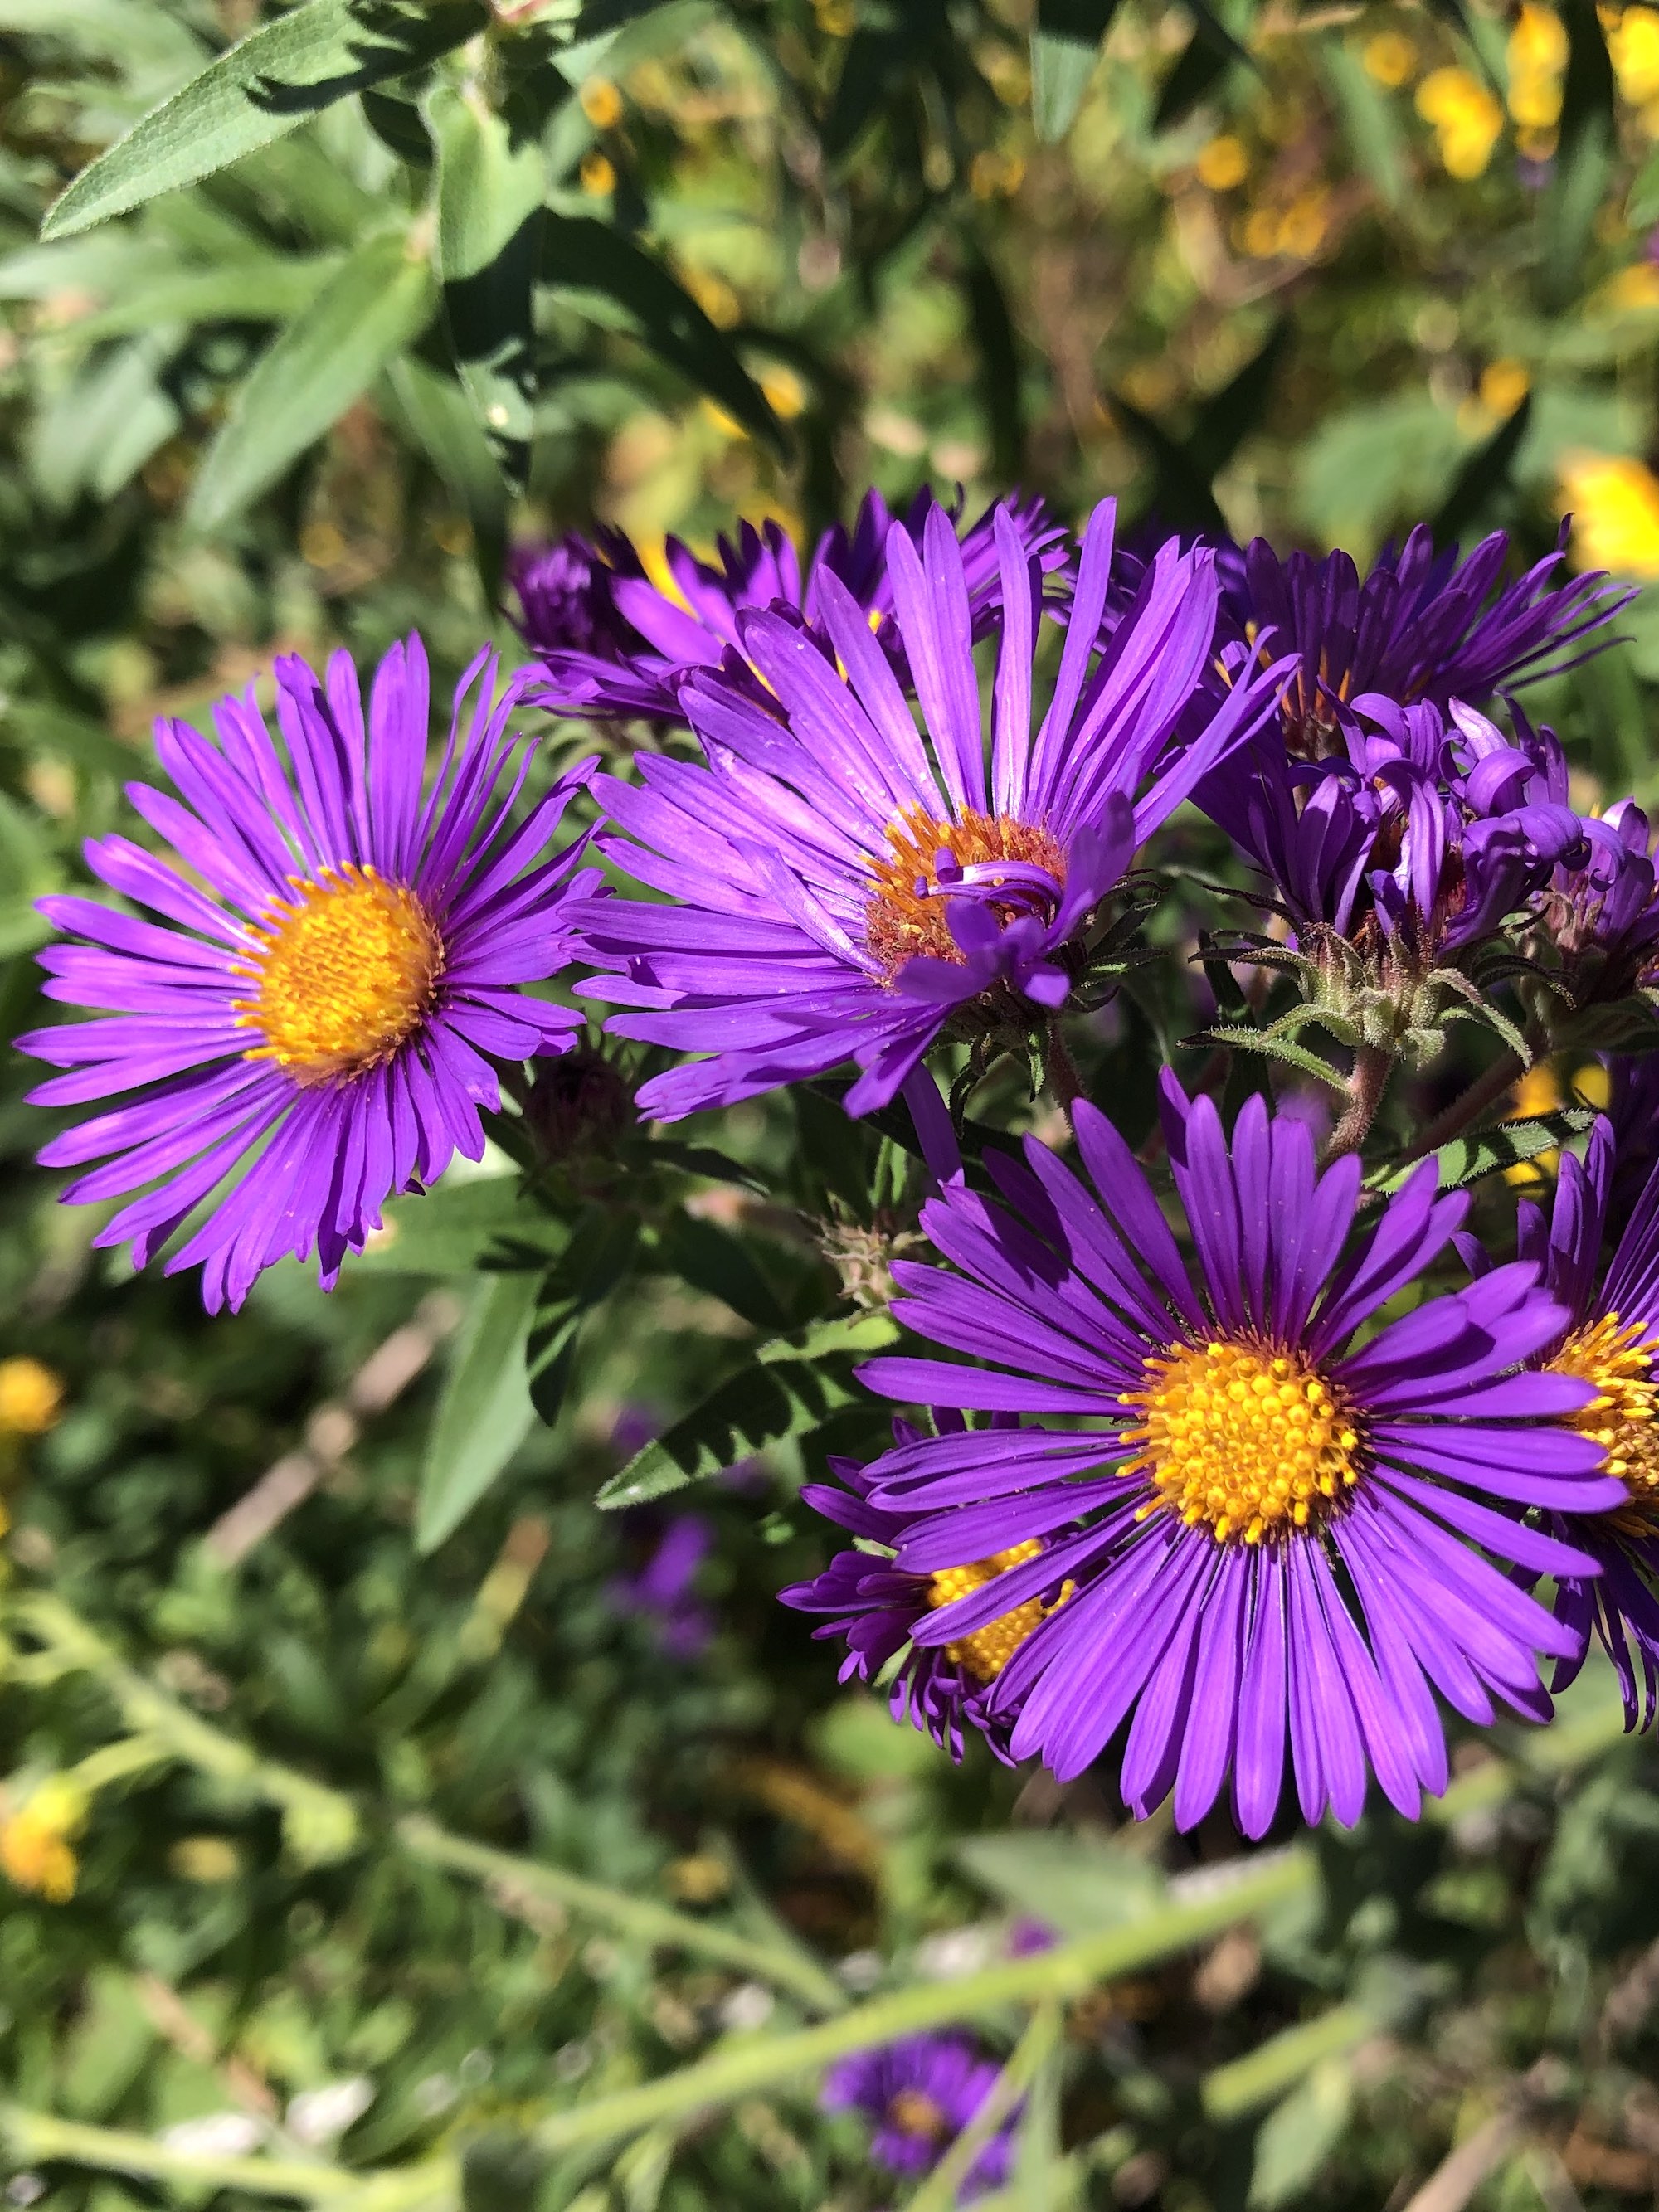 New England Aster on shore of Vilas Park Lagoon in Madison, Wisconsin on September 28, 2022.